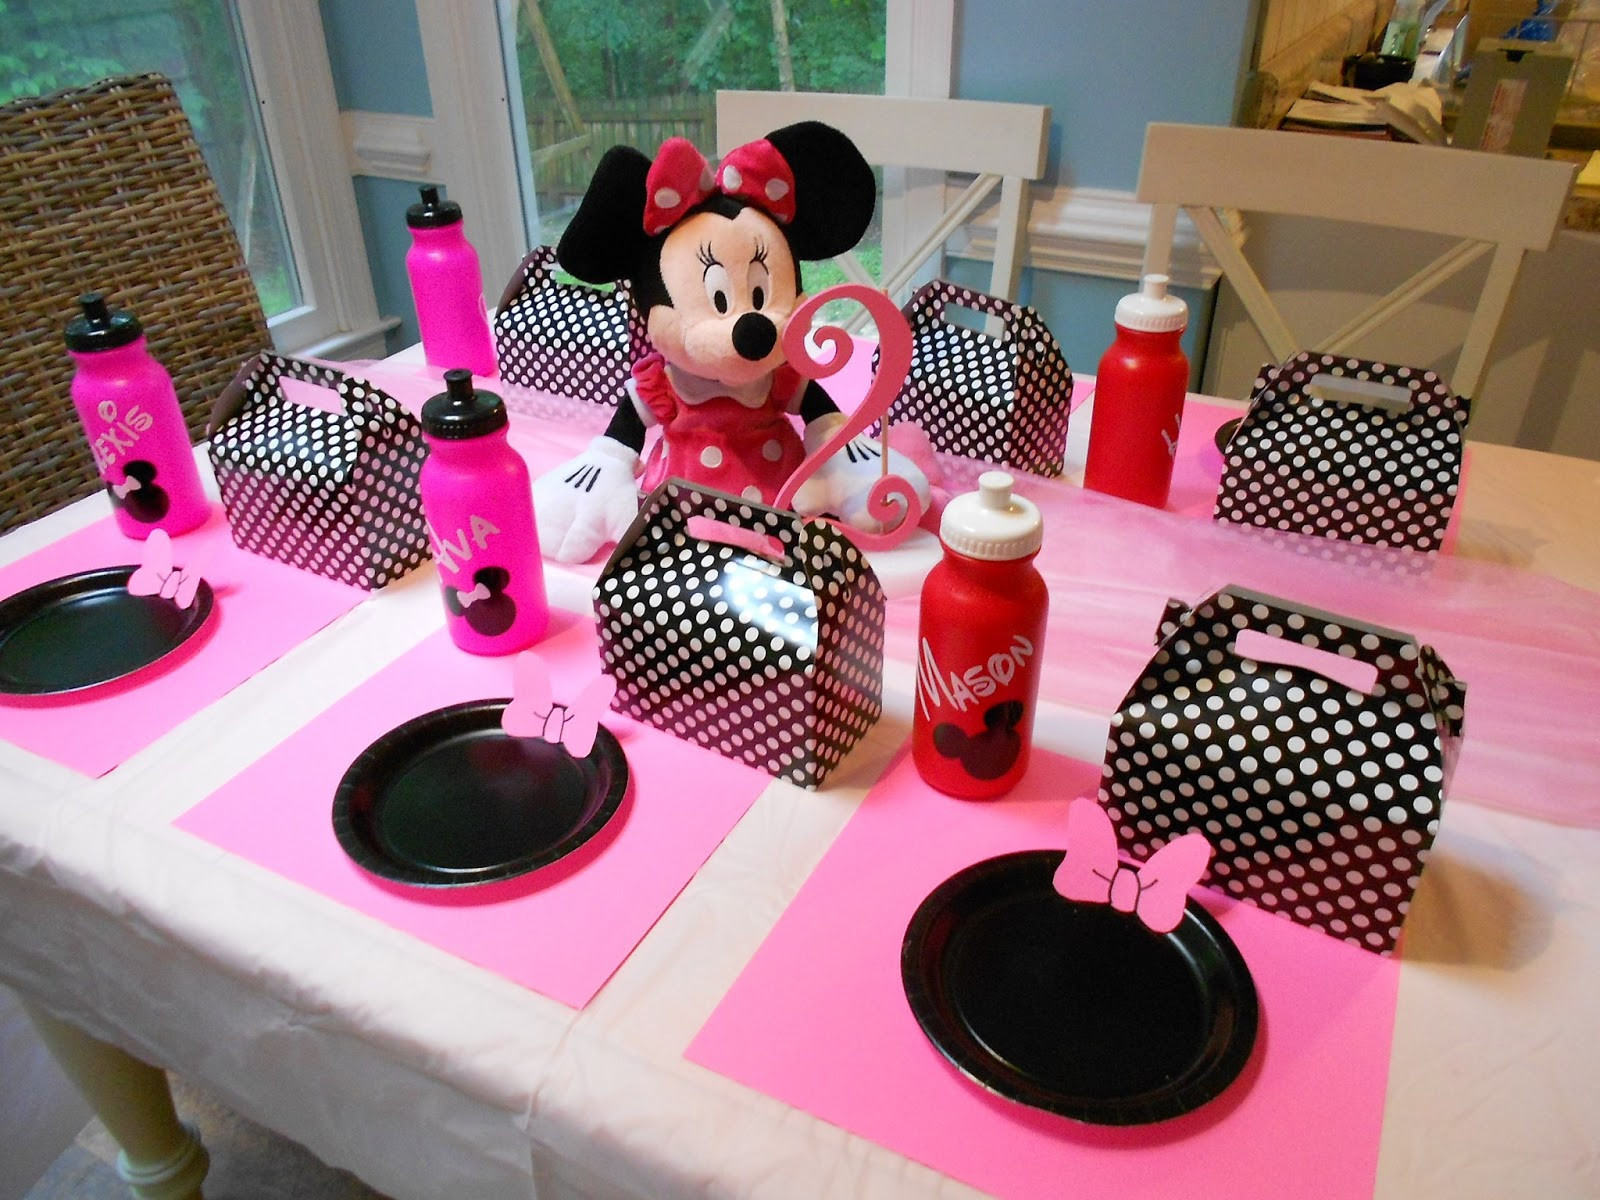 Minnie Mouse Birthday Decorations
 Adventures With Toddlers and Preschoolers Minnie Mouse